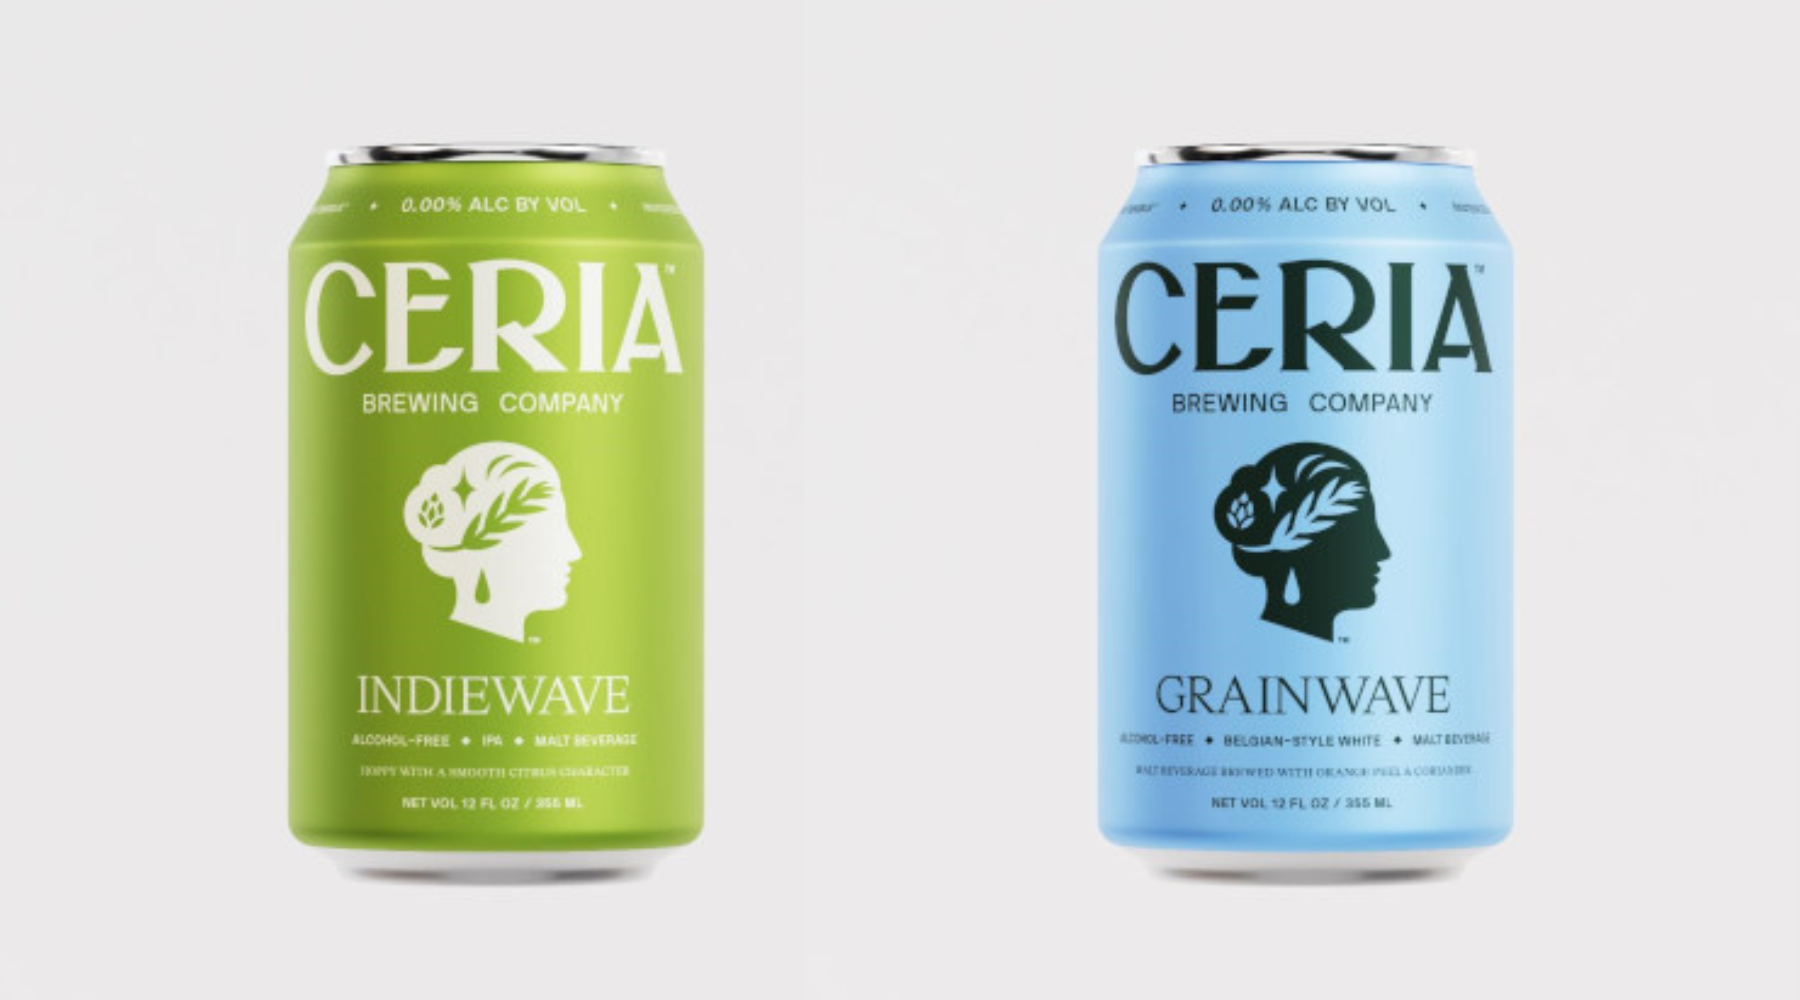 Beverage Industry: Ceria debuts new brand identity on alcohol free, THC beverages